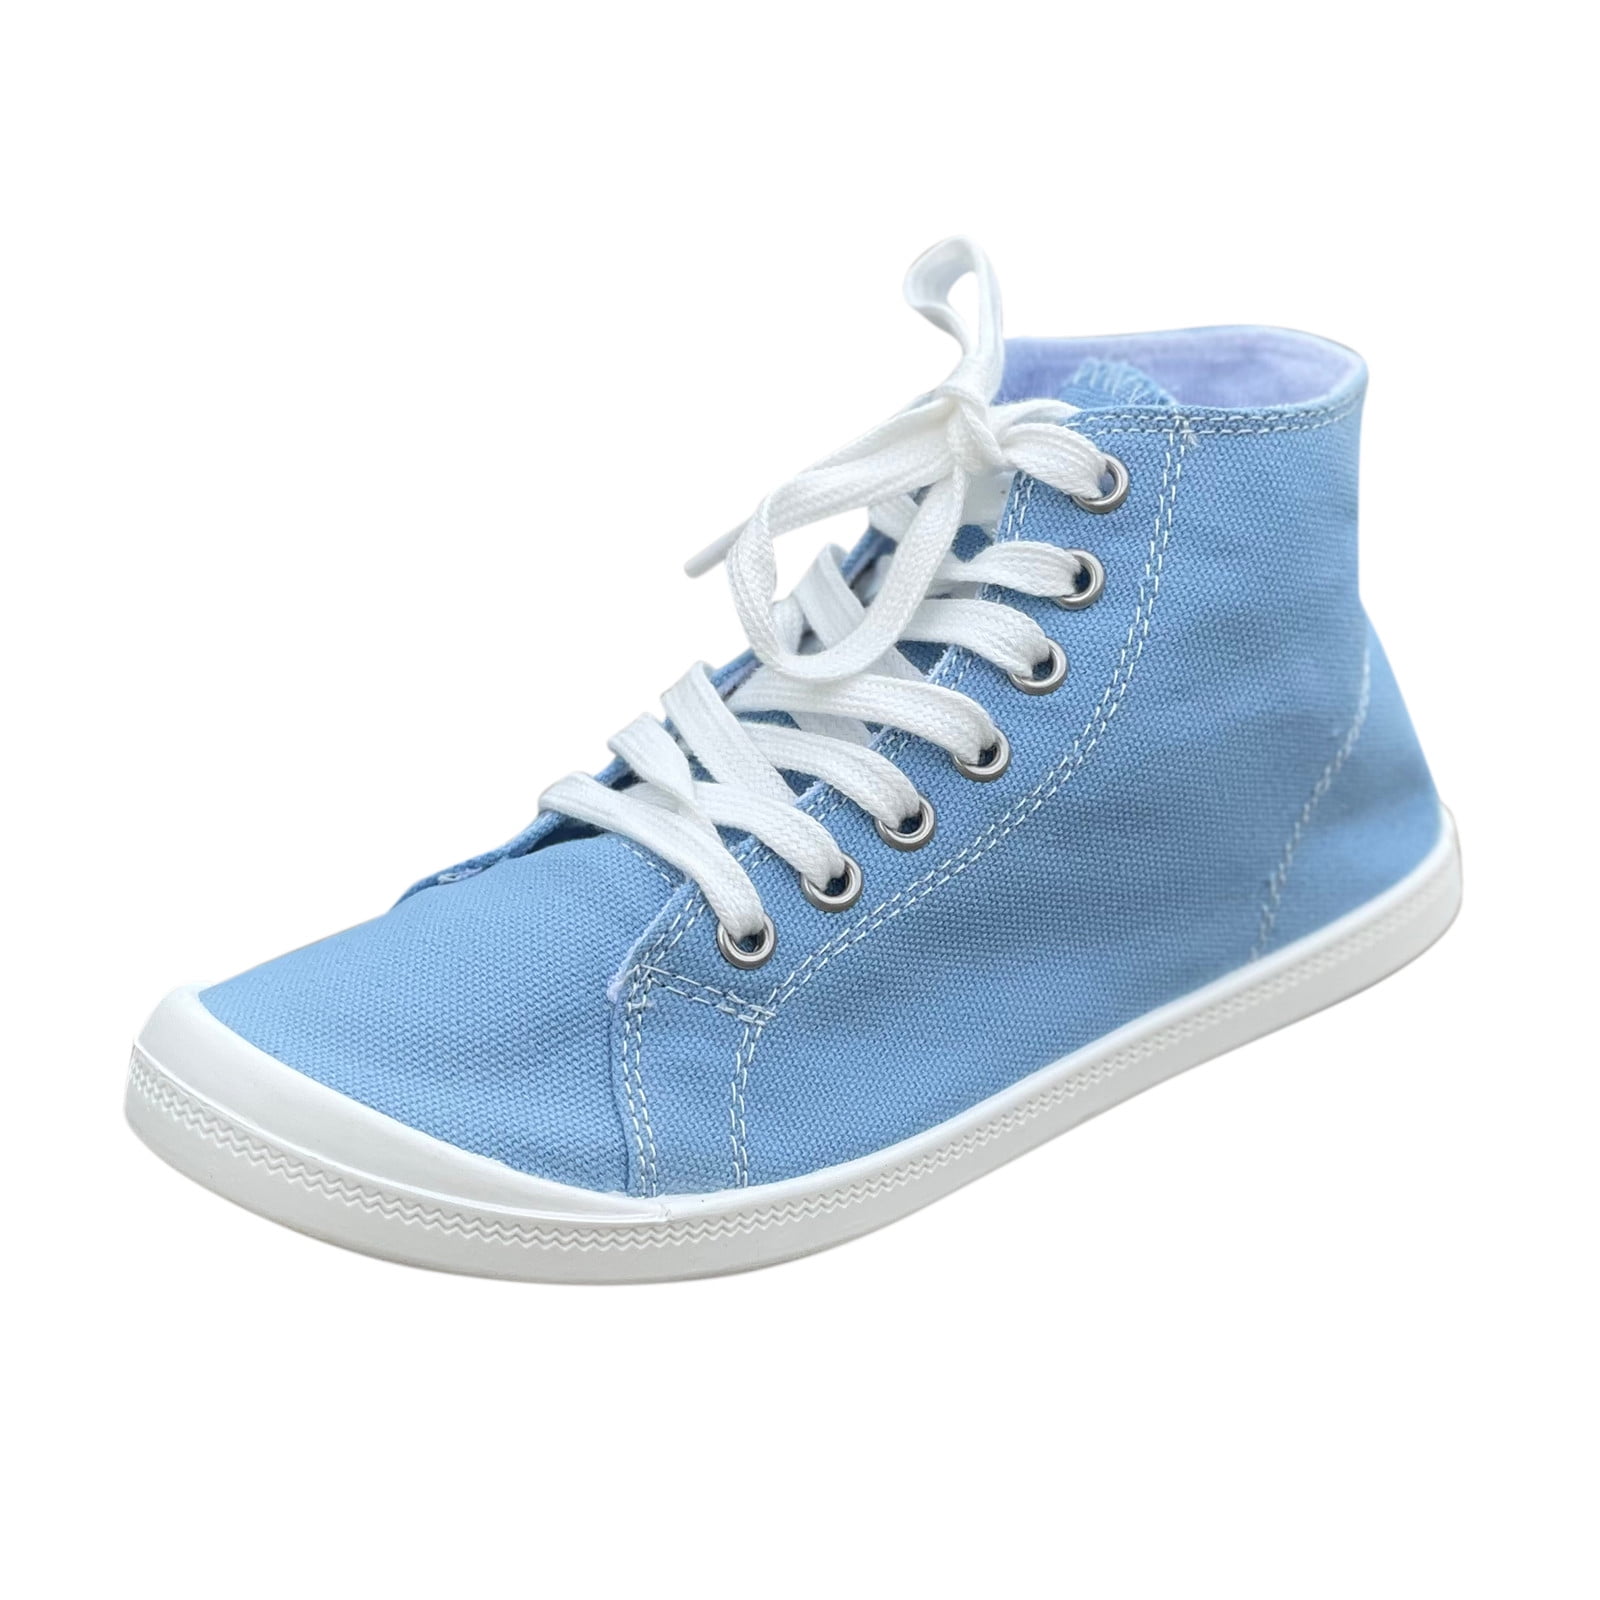 Youmylove Ladies High Top Casual Shoes Soft Sole Massage Flat Sneakers ...